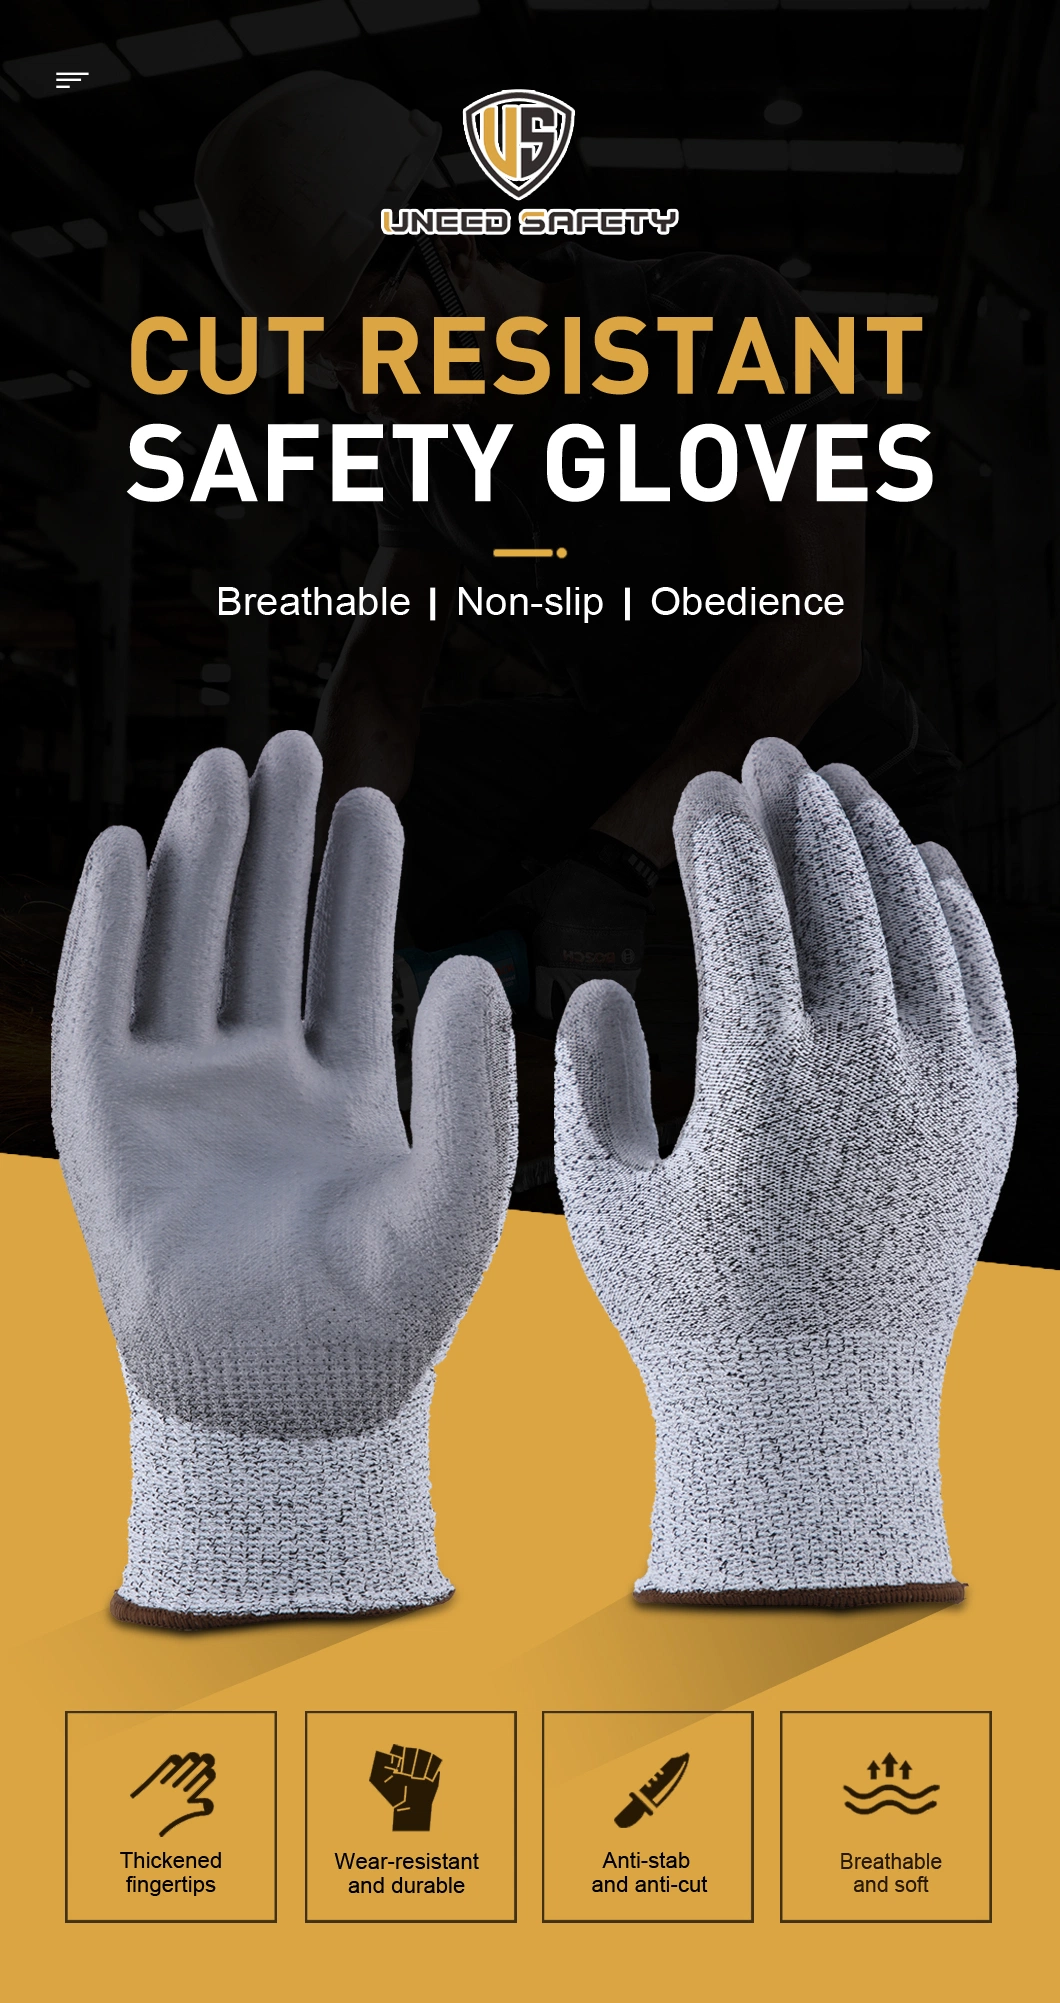 13G Seamless Mechanic Work Safety PU Cut Proof Resistant Labor Glove for Industrial Woking